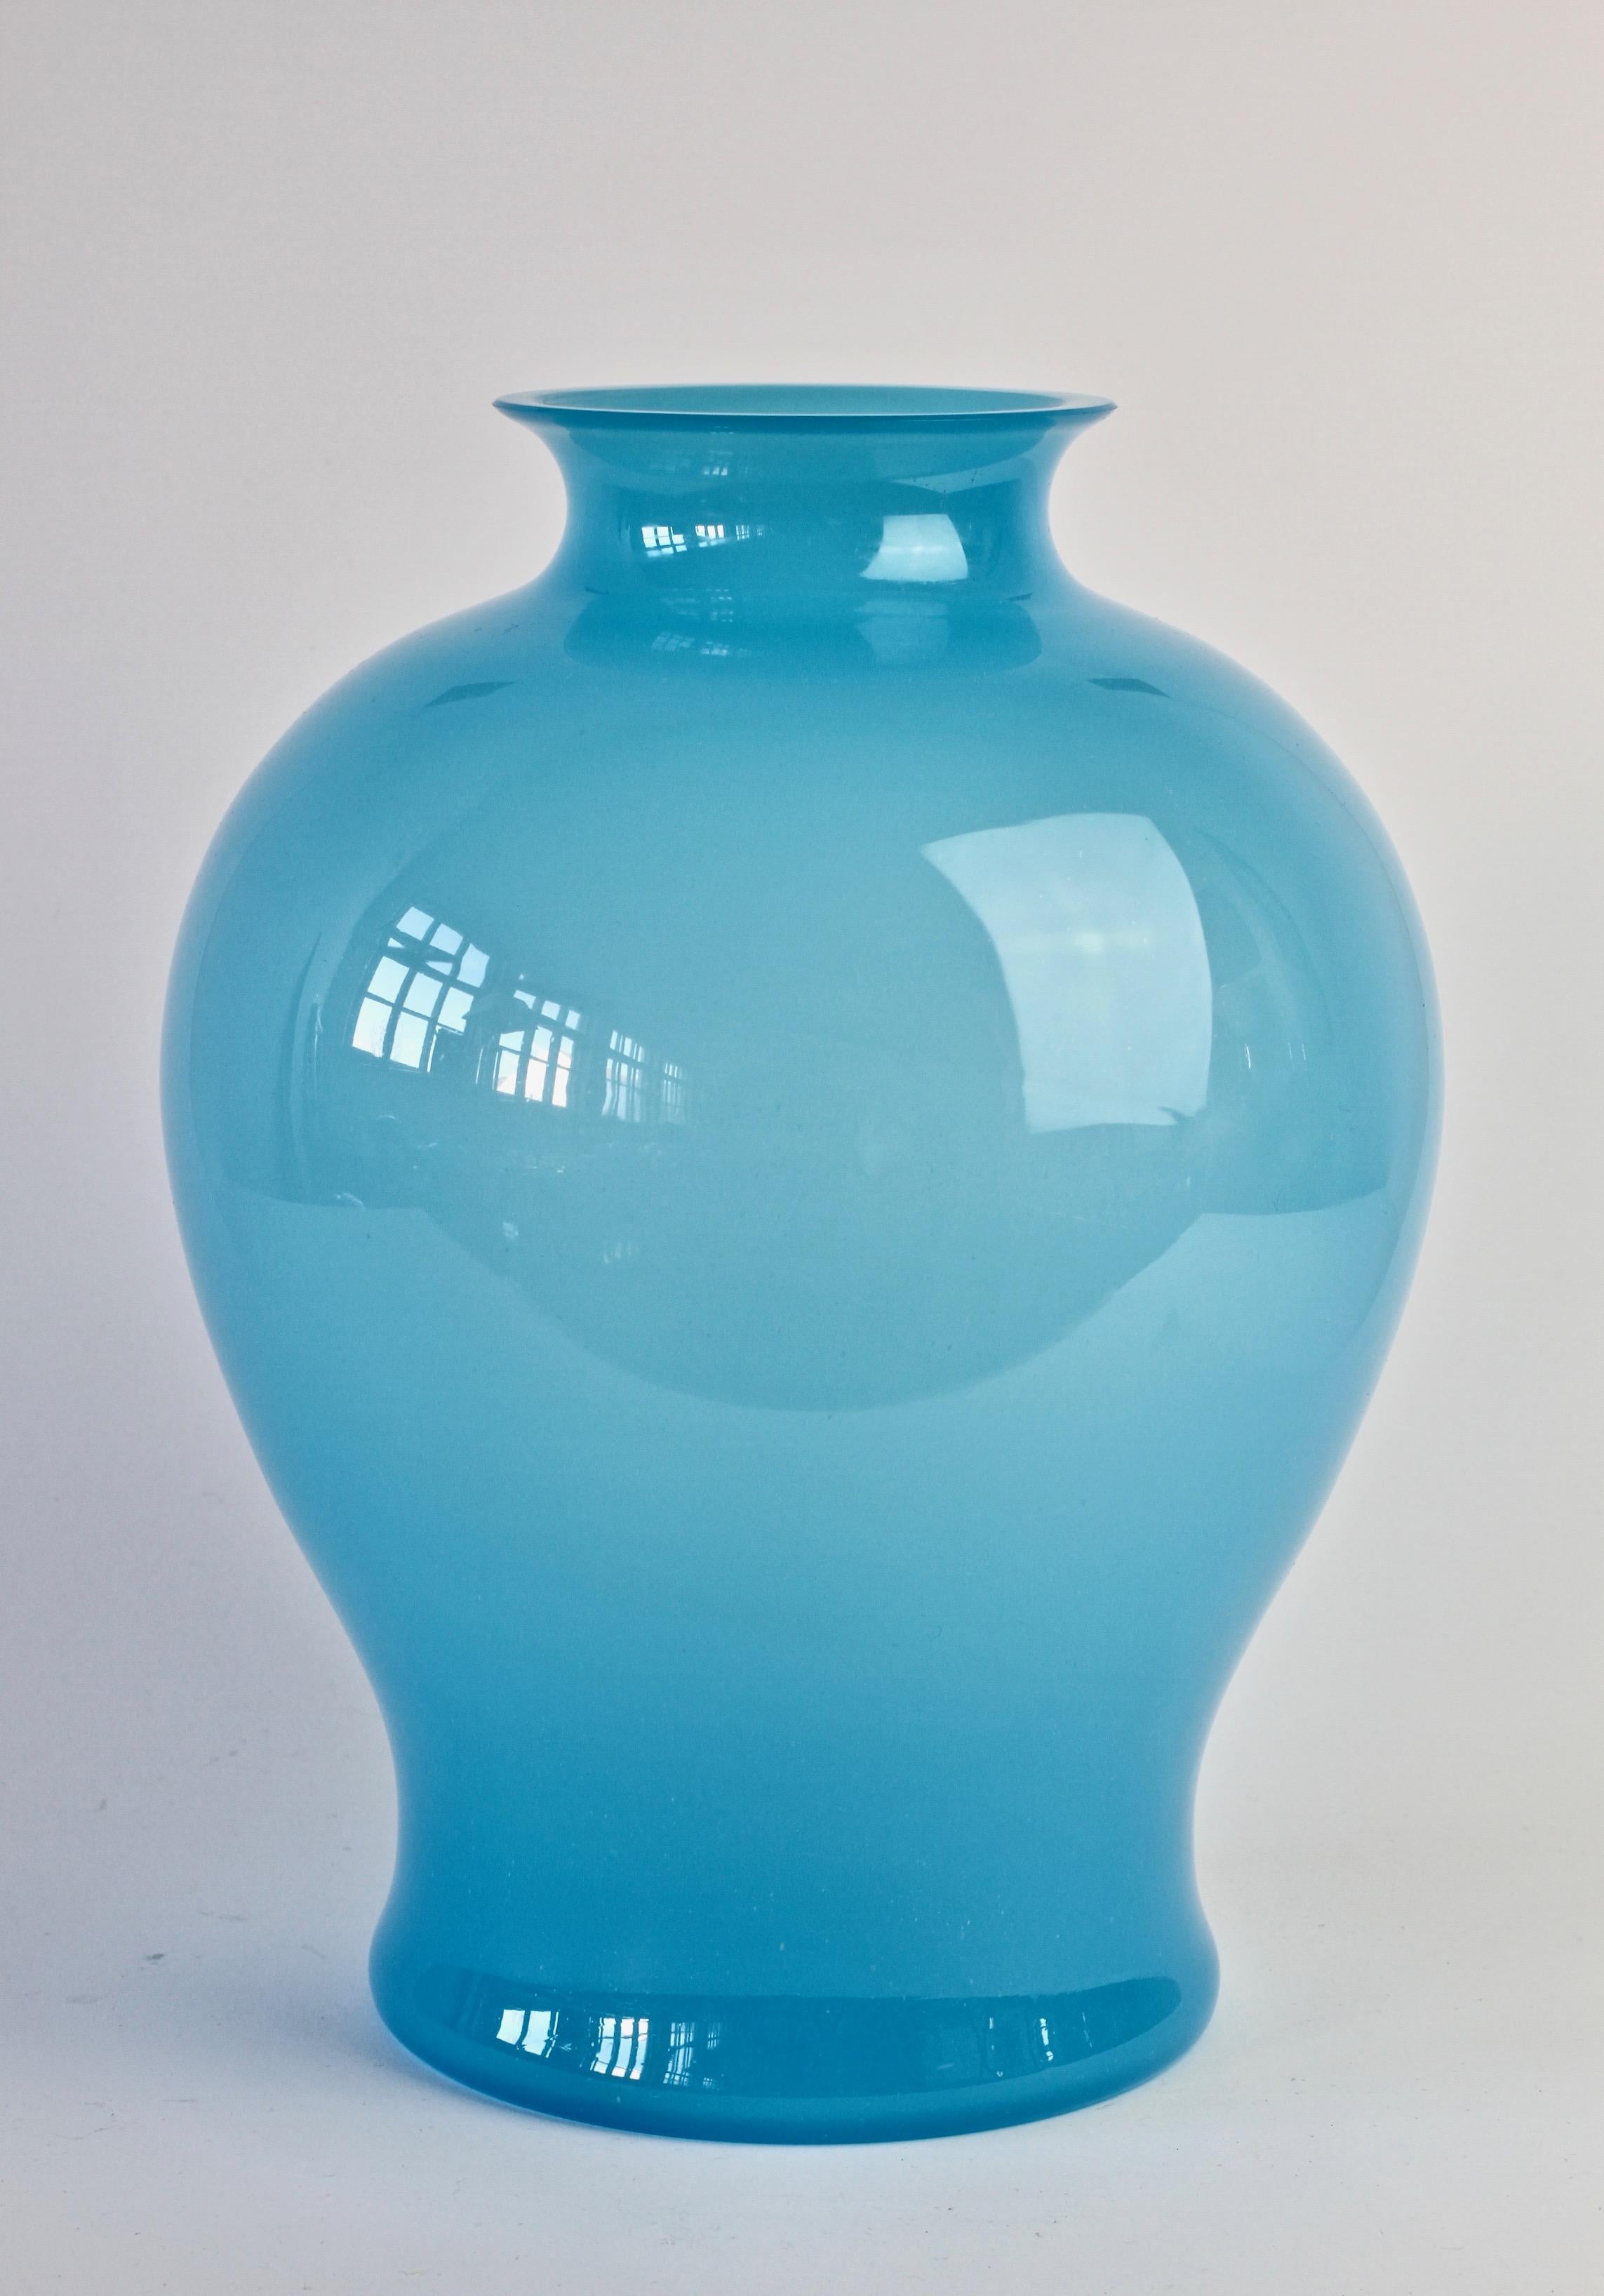 Tall, large vintage midcentury centre vase by Cenedese Vetri of Murano, Italy. Particularly striking is the elegant form and light blue color/colour. A rare vessel - especially in this size.

Dimensions are: 30cm tall and 24cm at widest point.

 